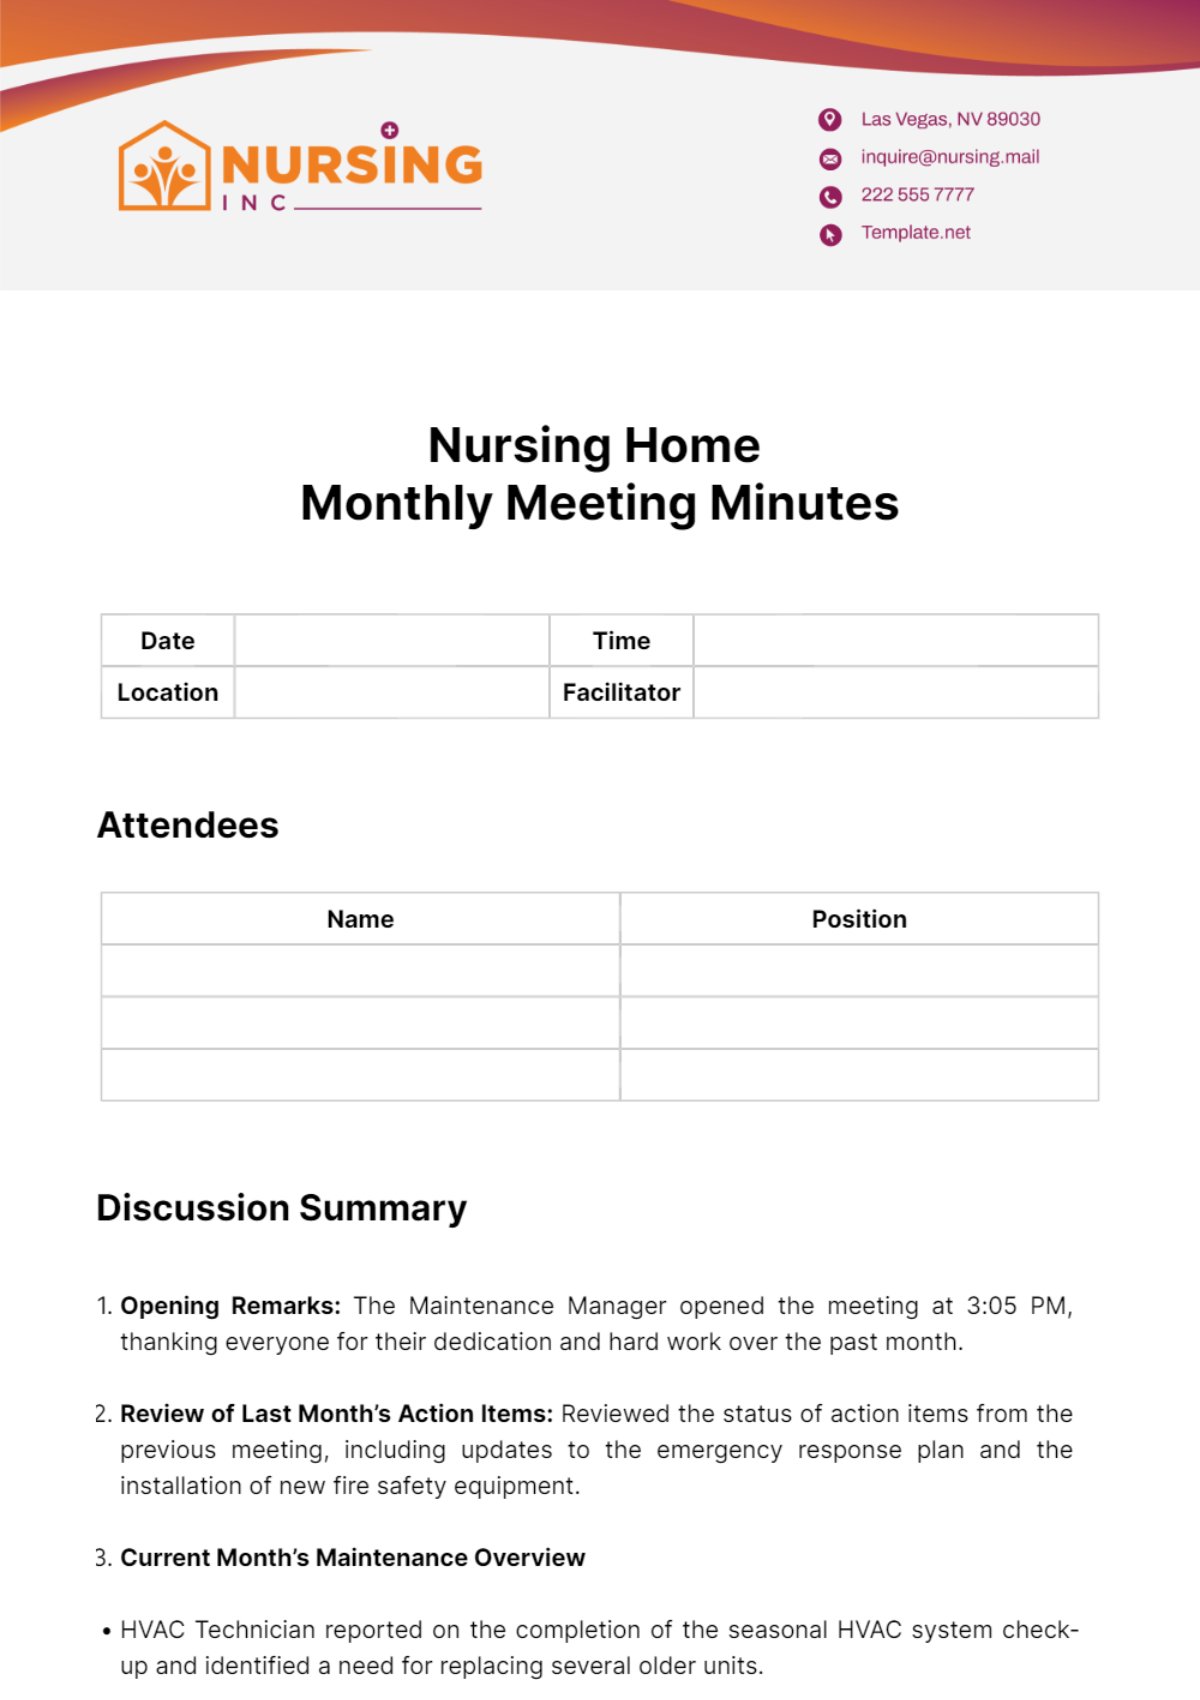 Nursing Home Monthly Meeting Minutes Template